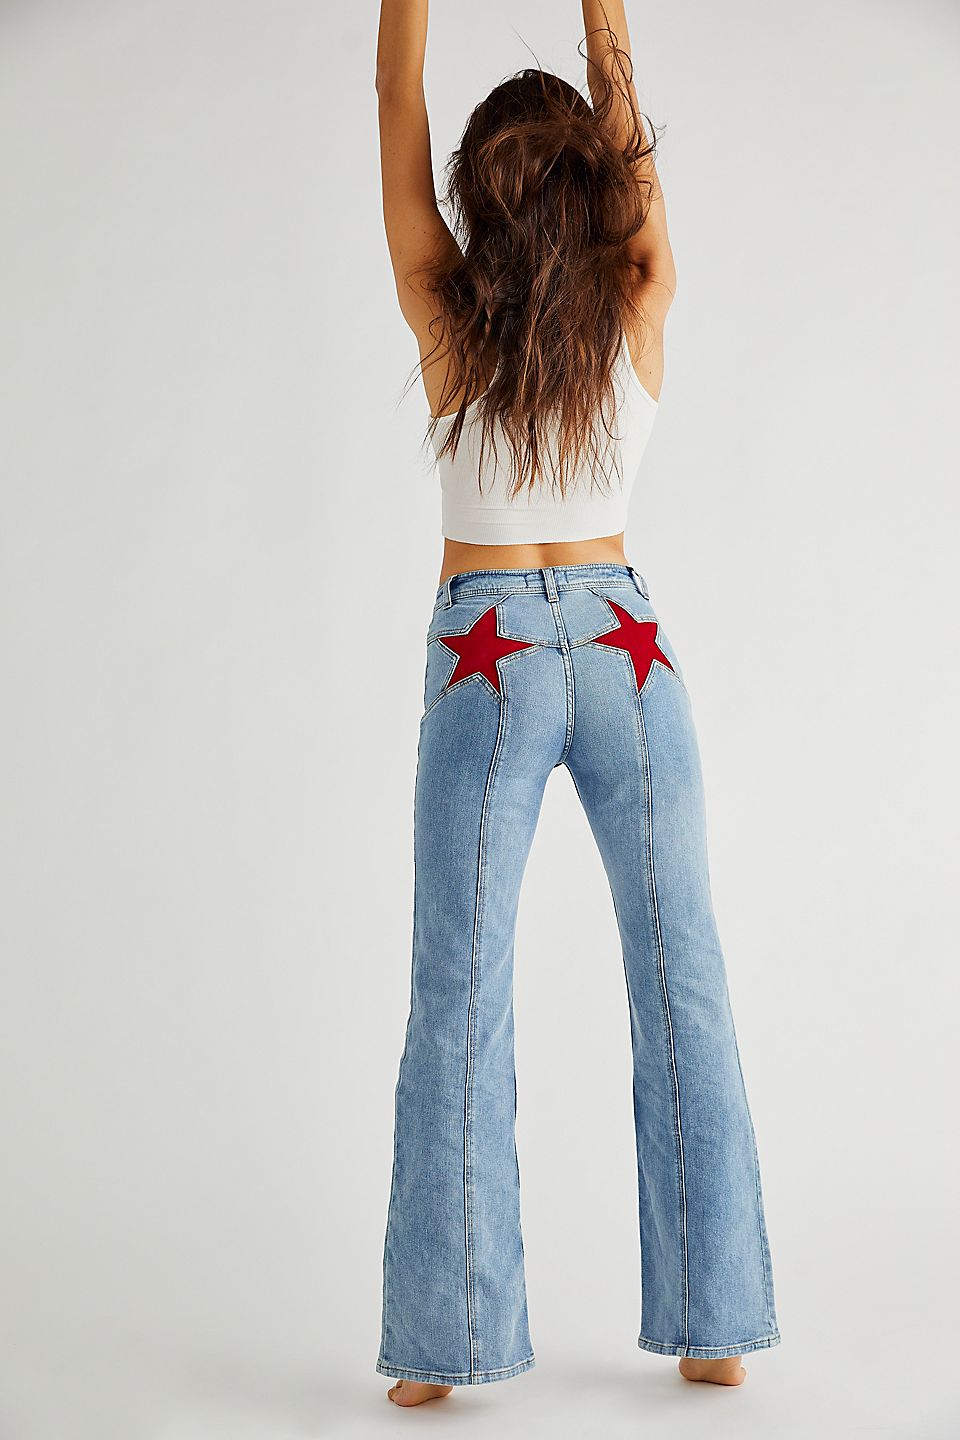 👖⭐️ The Top-rated Jeans To Shop Now 